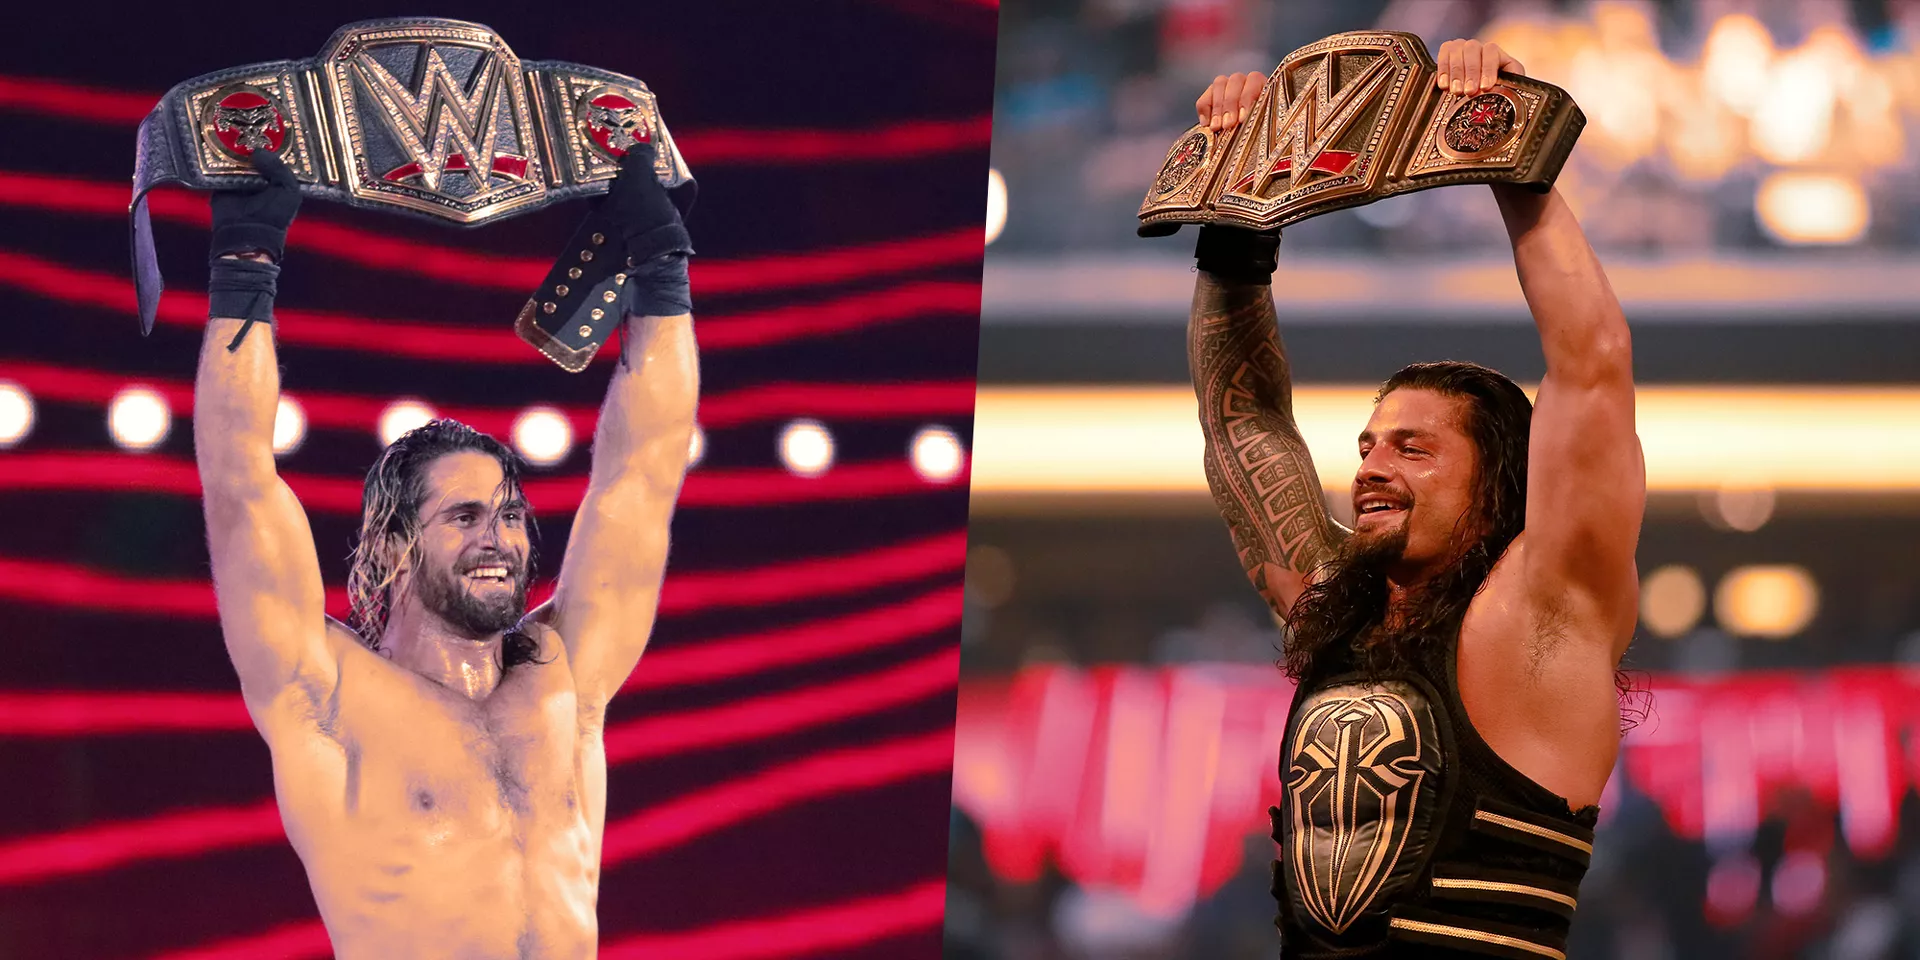 WWE superstars who are Grand Slam Champions